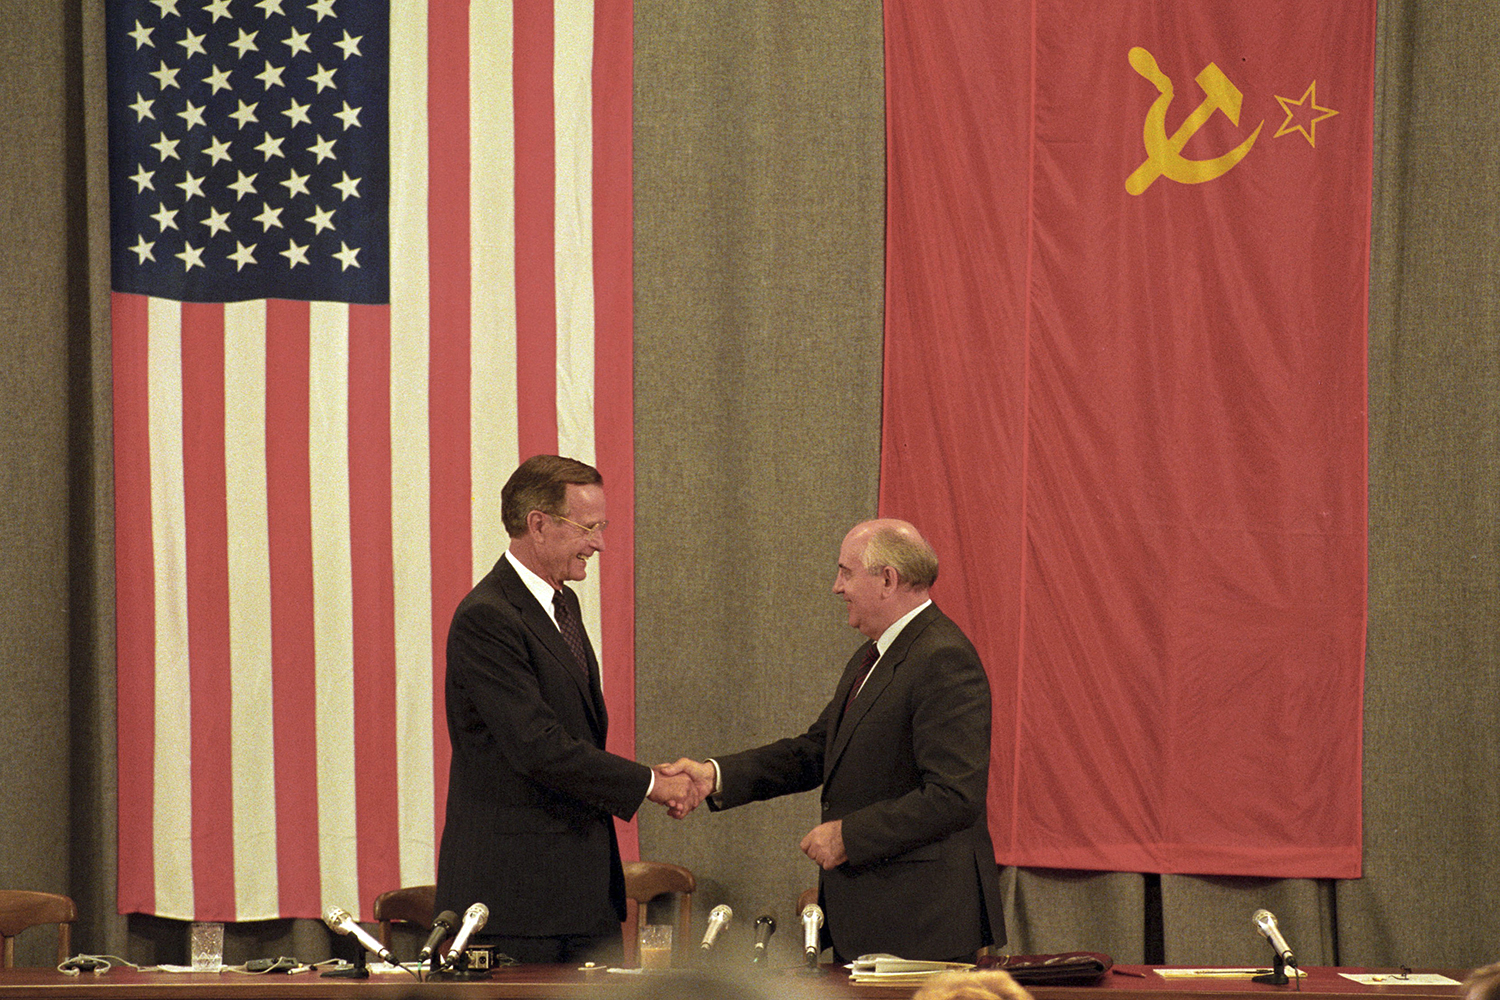 U.S. President George H. W. Bush and Soviet leader Mikhail Gorbachev shake hands after holding a press conference in Moscow on July 31, 1991.